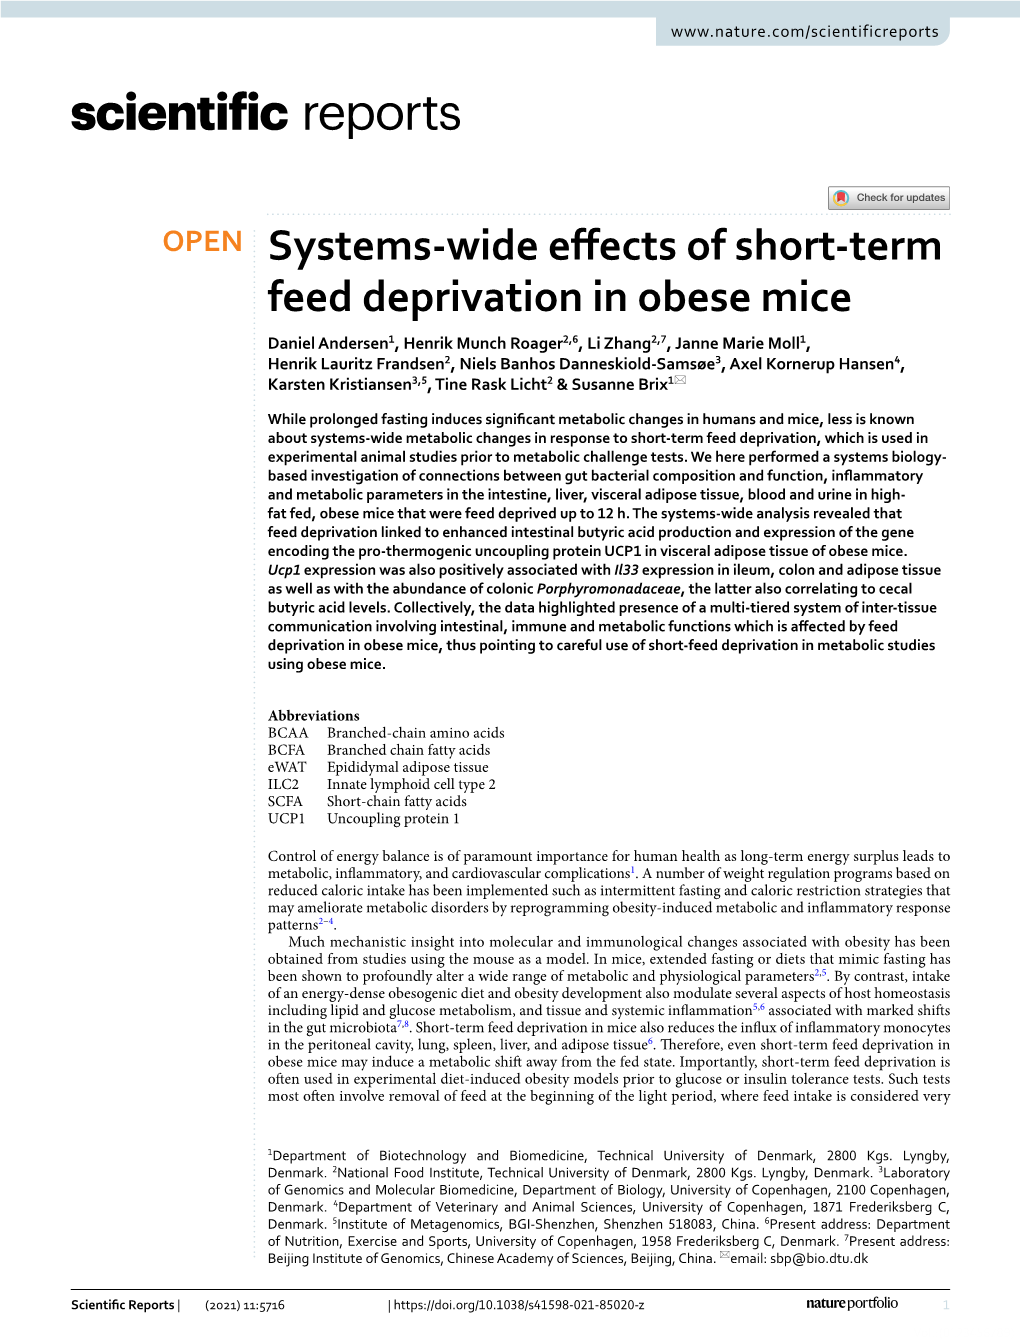 Systems-Wide Effects of Short-Term Feed Deprivation in Obese Mice